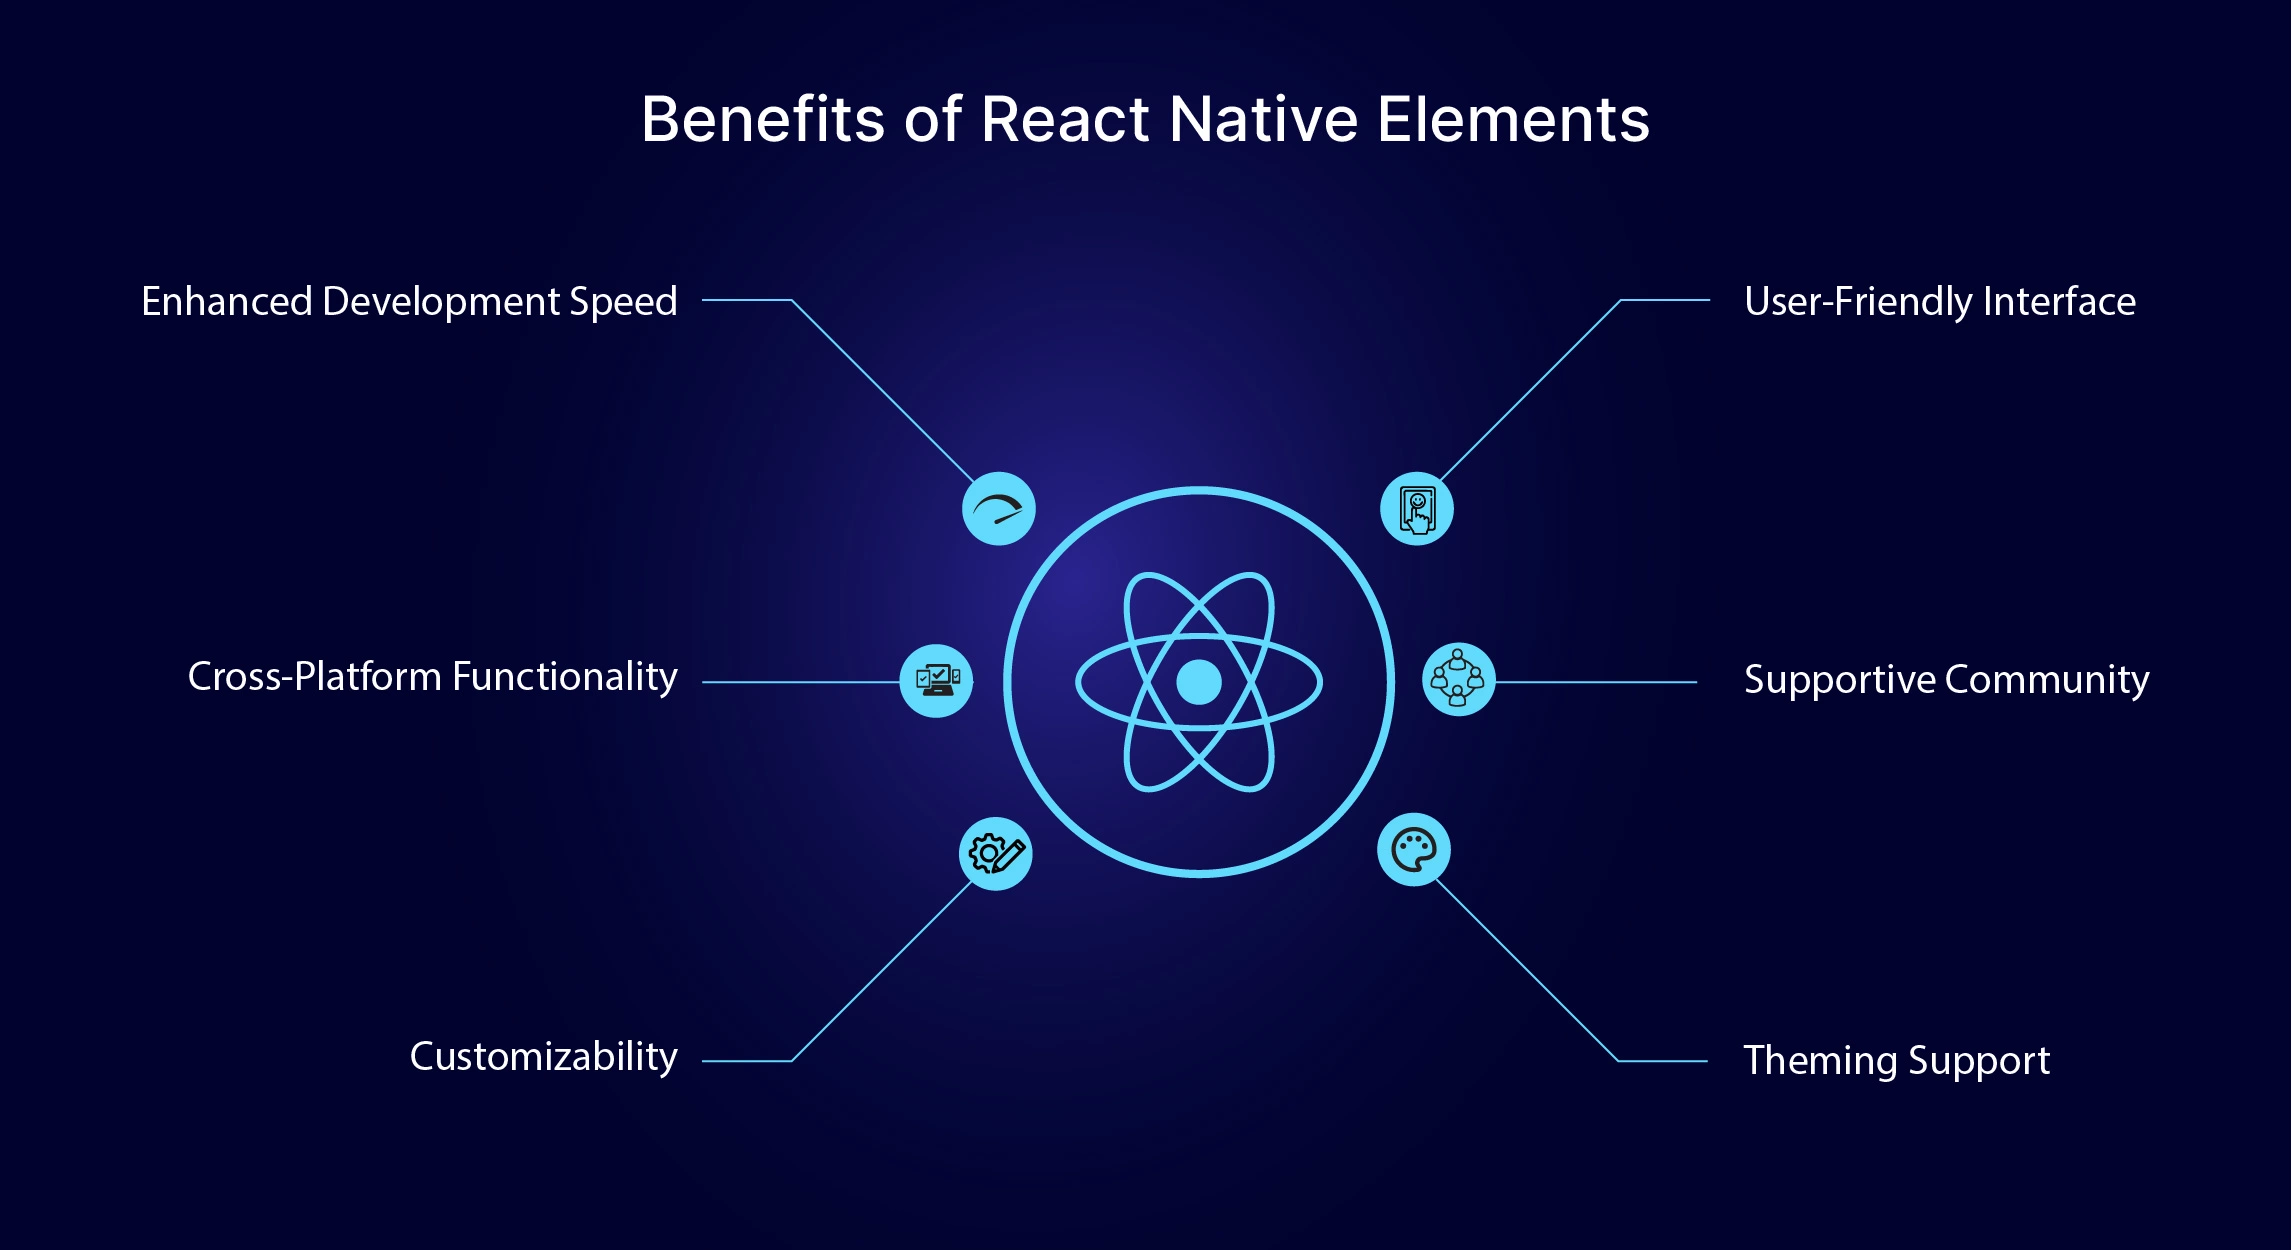 Benefits of React Native Elements